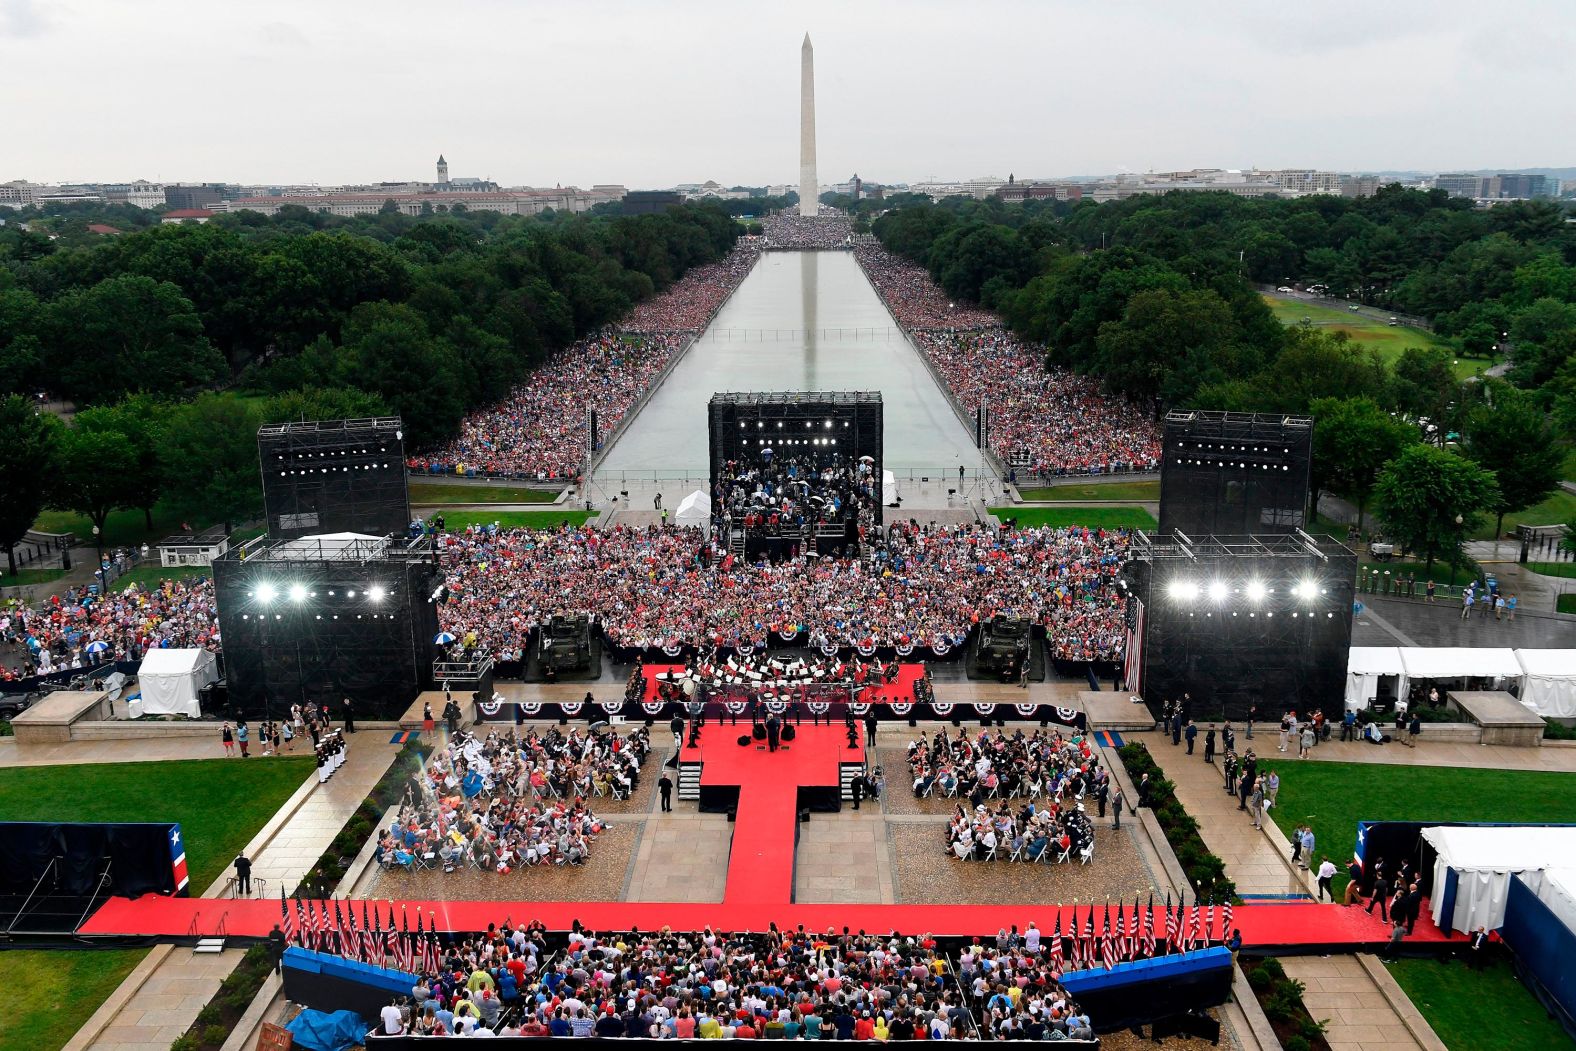 Crowds gather around the Lincoln Memorial Reflecting Pool to watch Trump speak in July 2019. <a href="index.php?page=&url=https%3A%2F%2Fwww.cnn.com%2F2019%2F07%2F04%2Fpolitics%2Fgallery%2Ftrump-july-fourth-celebration%2Findex.html" target="_blank">Trump's "Salute to America" ceremony</a> featured military flyovers, music and a largely apolitical speech that struck a patriotic tone. But the event drew considerable scrutiny in the days leading up to it, as <a href="index.php?page=&url=https%3A%2F%2Fwww.cnn.com%2F2019%2F07%2F03%2Fpolitics%2Fmilitary-concerns-trump-july-4th-event%2Findex.html" target="_blank">some felt it was politicizing the military</a>. There were also critics who said the event, <a href="index.php?page=&url=https%3A%2F%2Fwww.cnn.com%2F2019%2F07%2F02%2Fpolitics%2Fvip-tickets-white-house-show%2Findex.html" target="_blank">with its massive VIP section and tickets for political donors,</a> had the sheen of a partisan affair. 